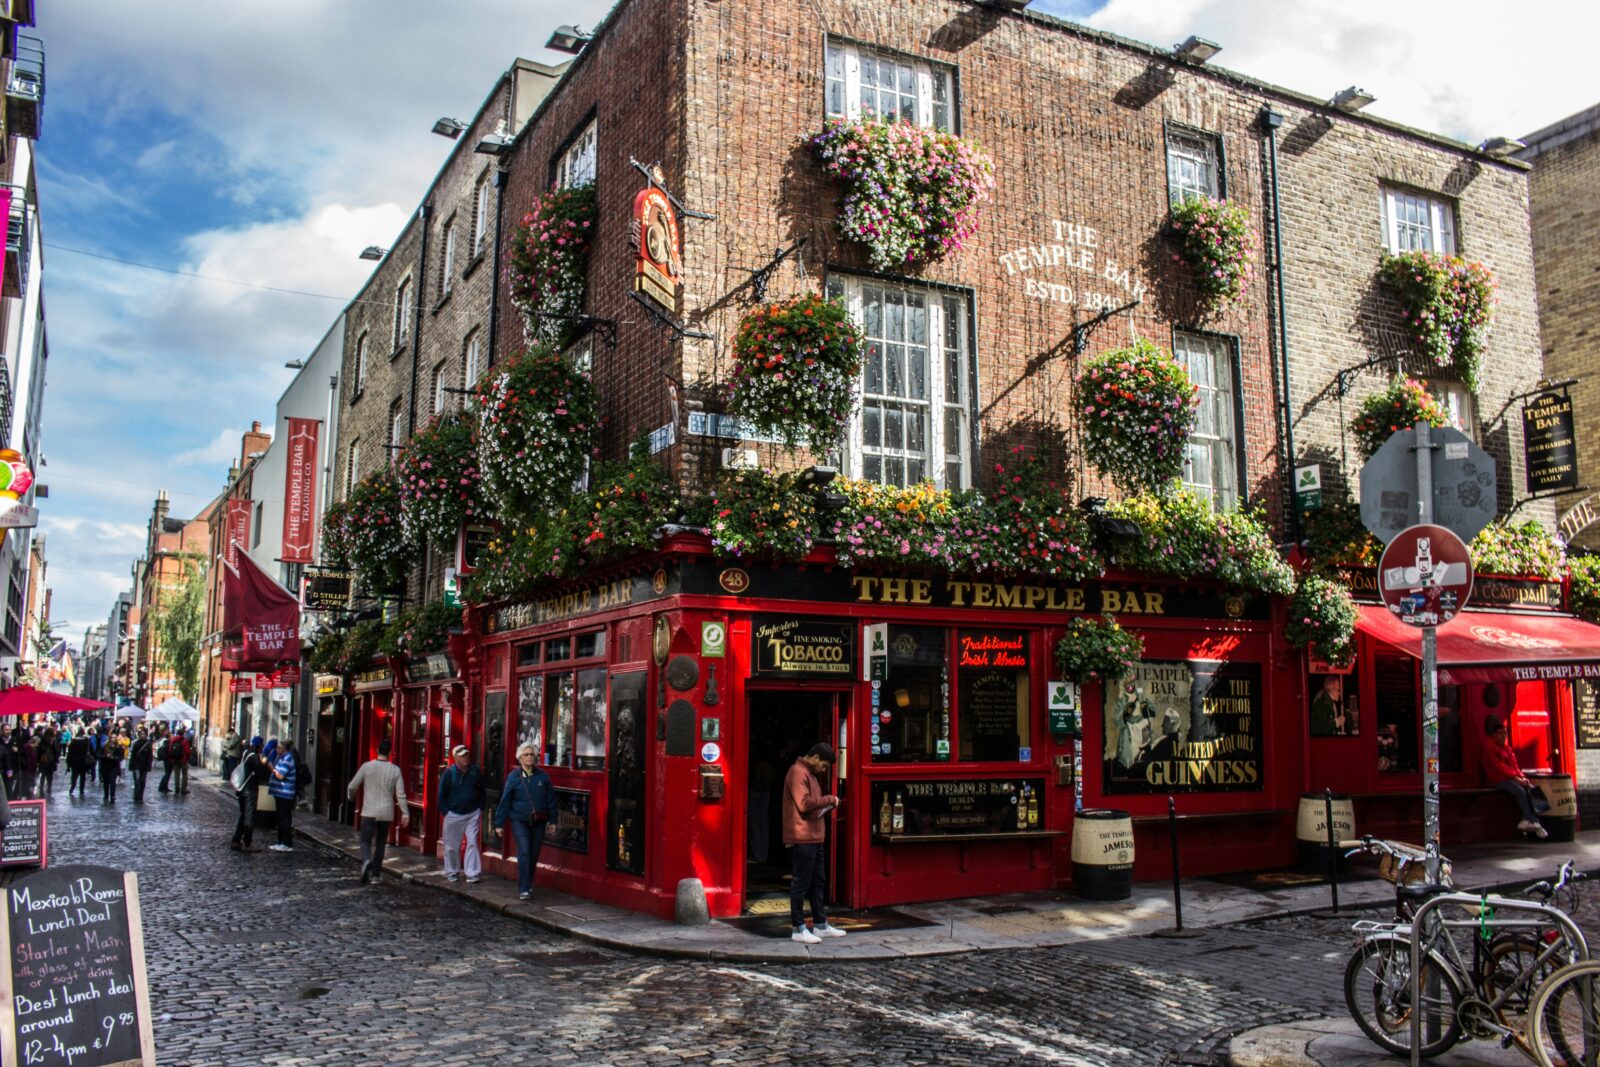 Dublin is one of the cities you can get to with a flight from Manchester for a day trip